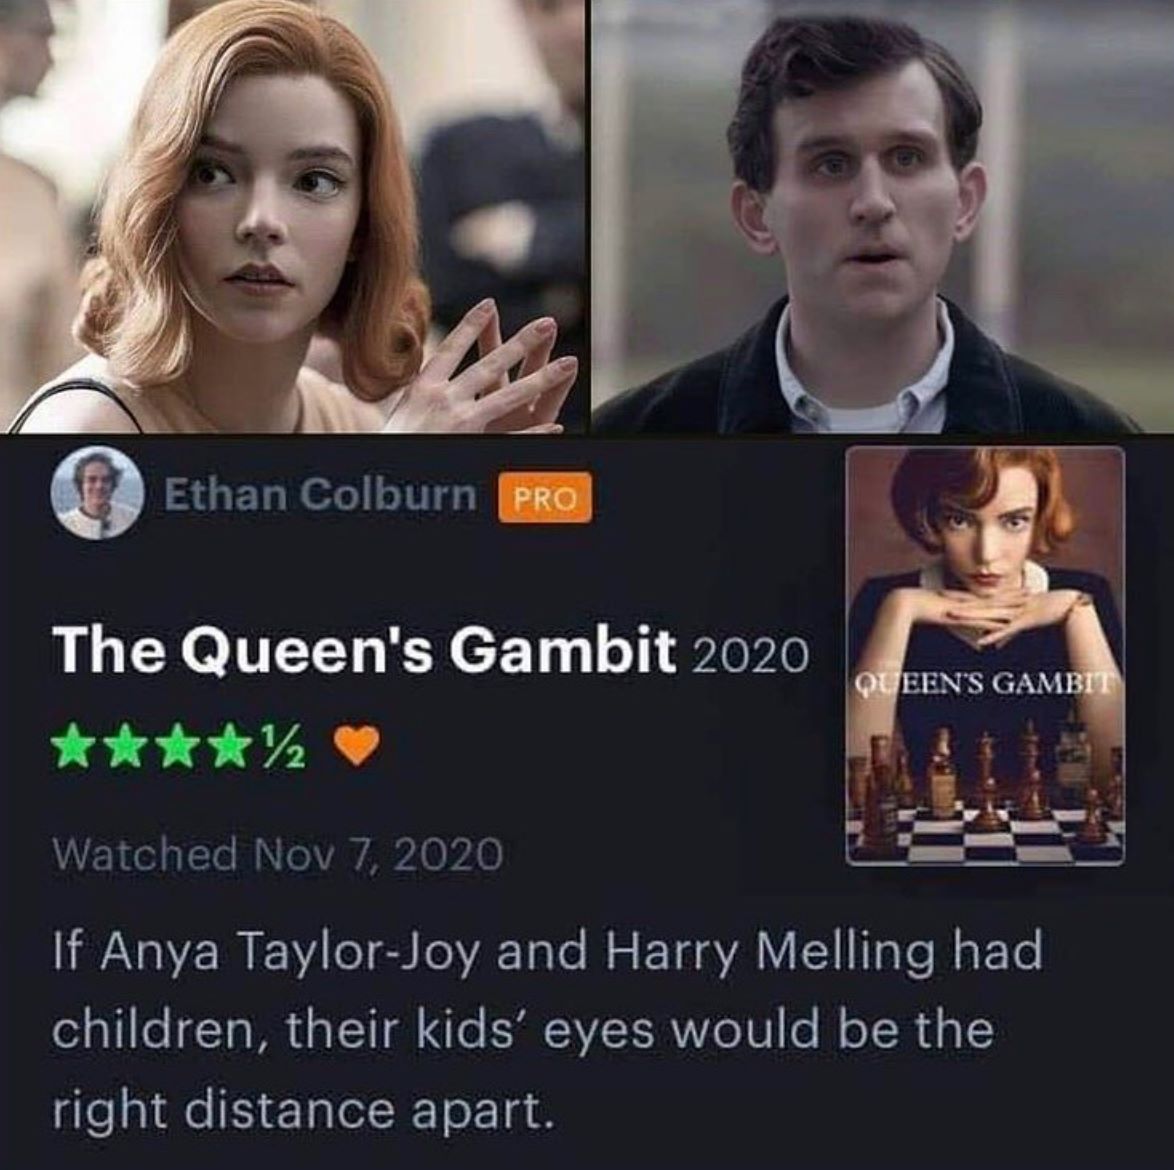 photo caption - Ethan Colburn Pro The Queen's Gambit 2020 12 Queen'S Gambit Watched If Anya TaylorJoy and Harry Melling had children, their kids' eyes would be the right distance apart.